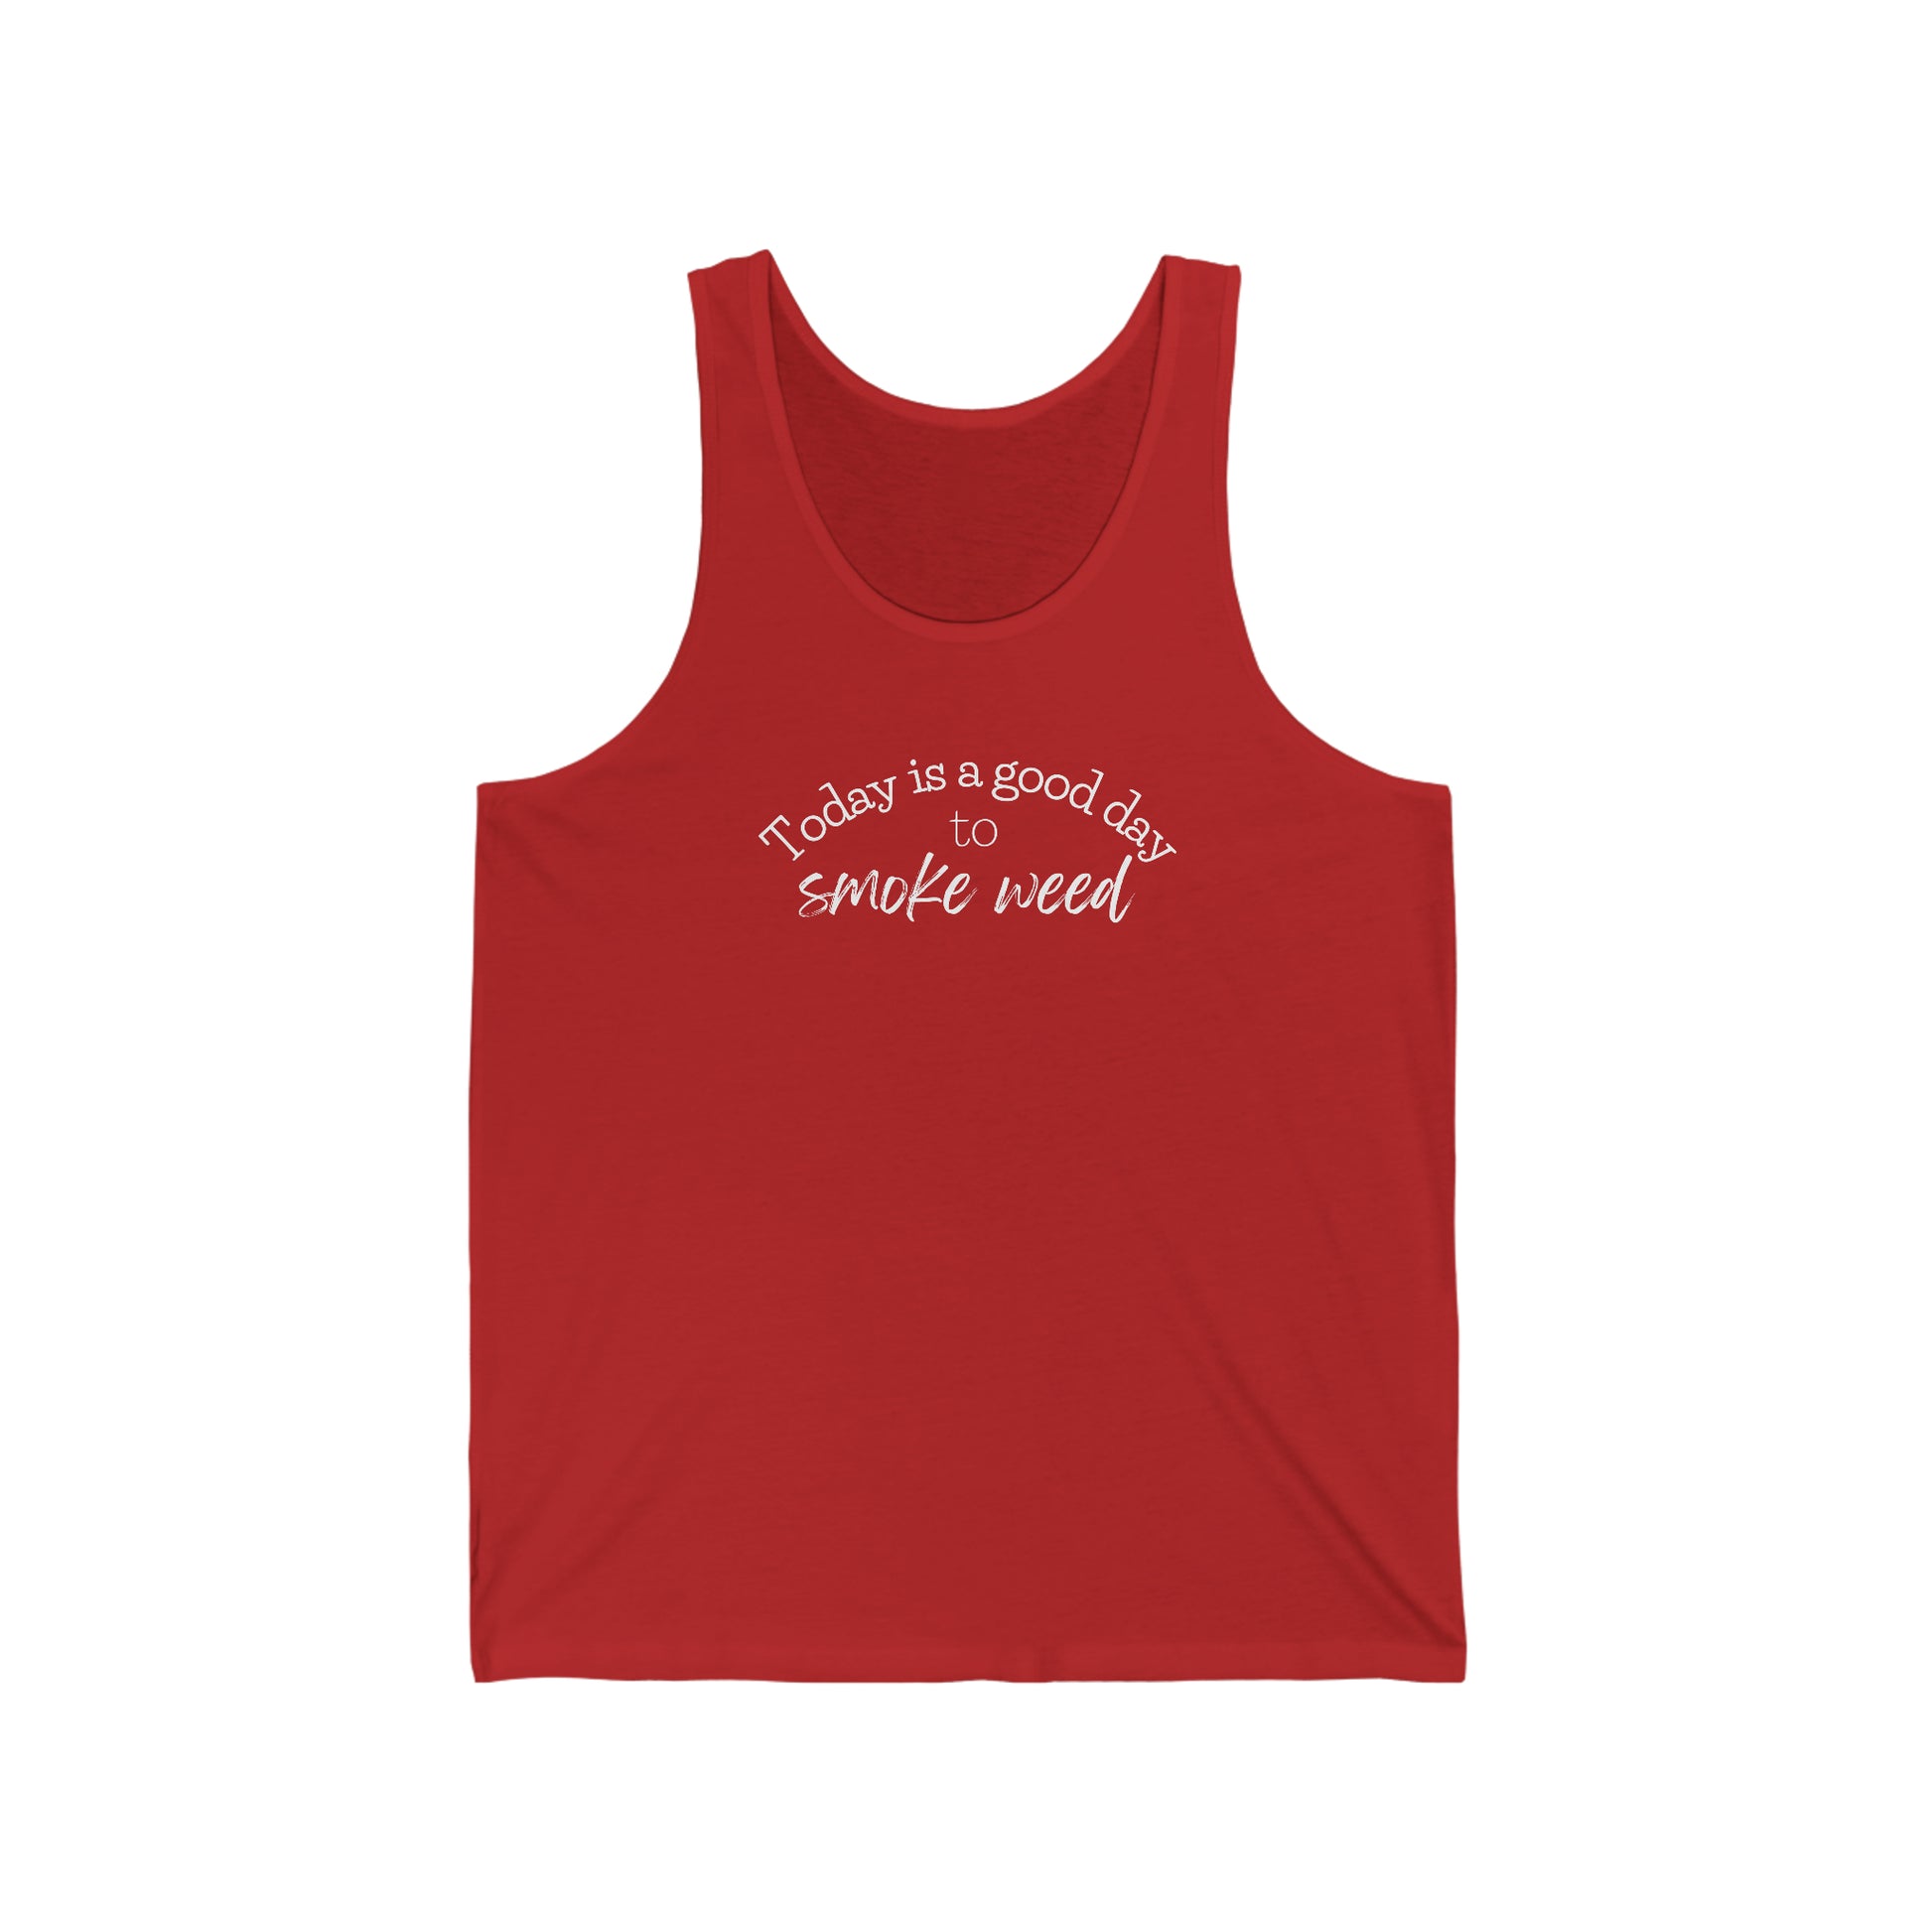 Unisex jersey tank top with the phrase "Today is a Good Day to Smoke Weed" printed in white cursive on the front.